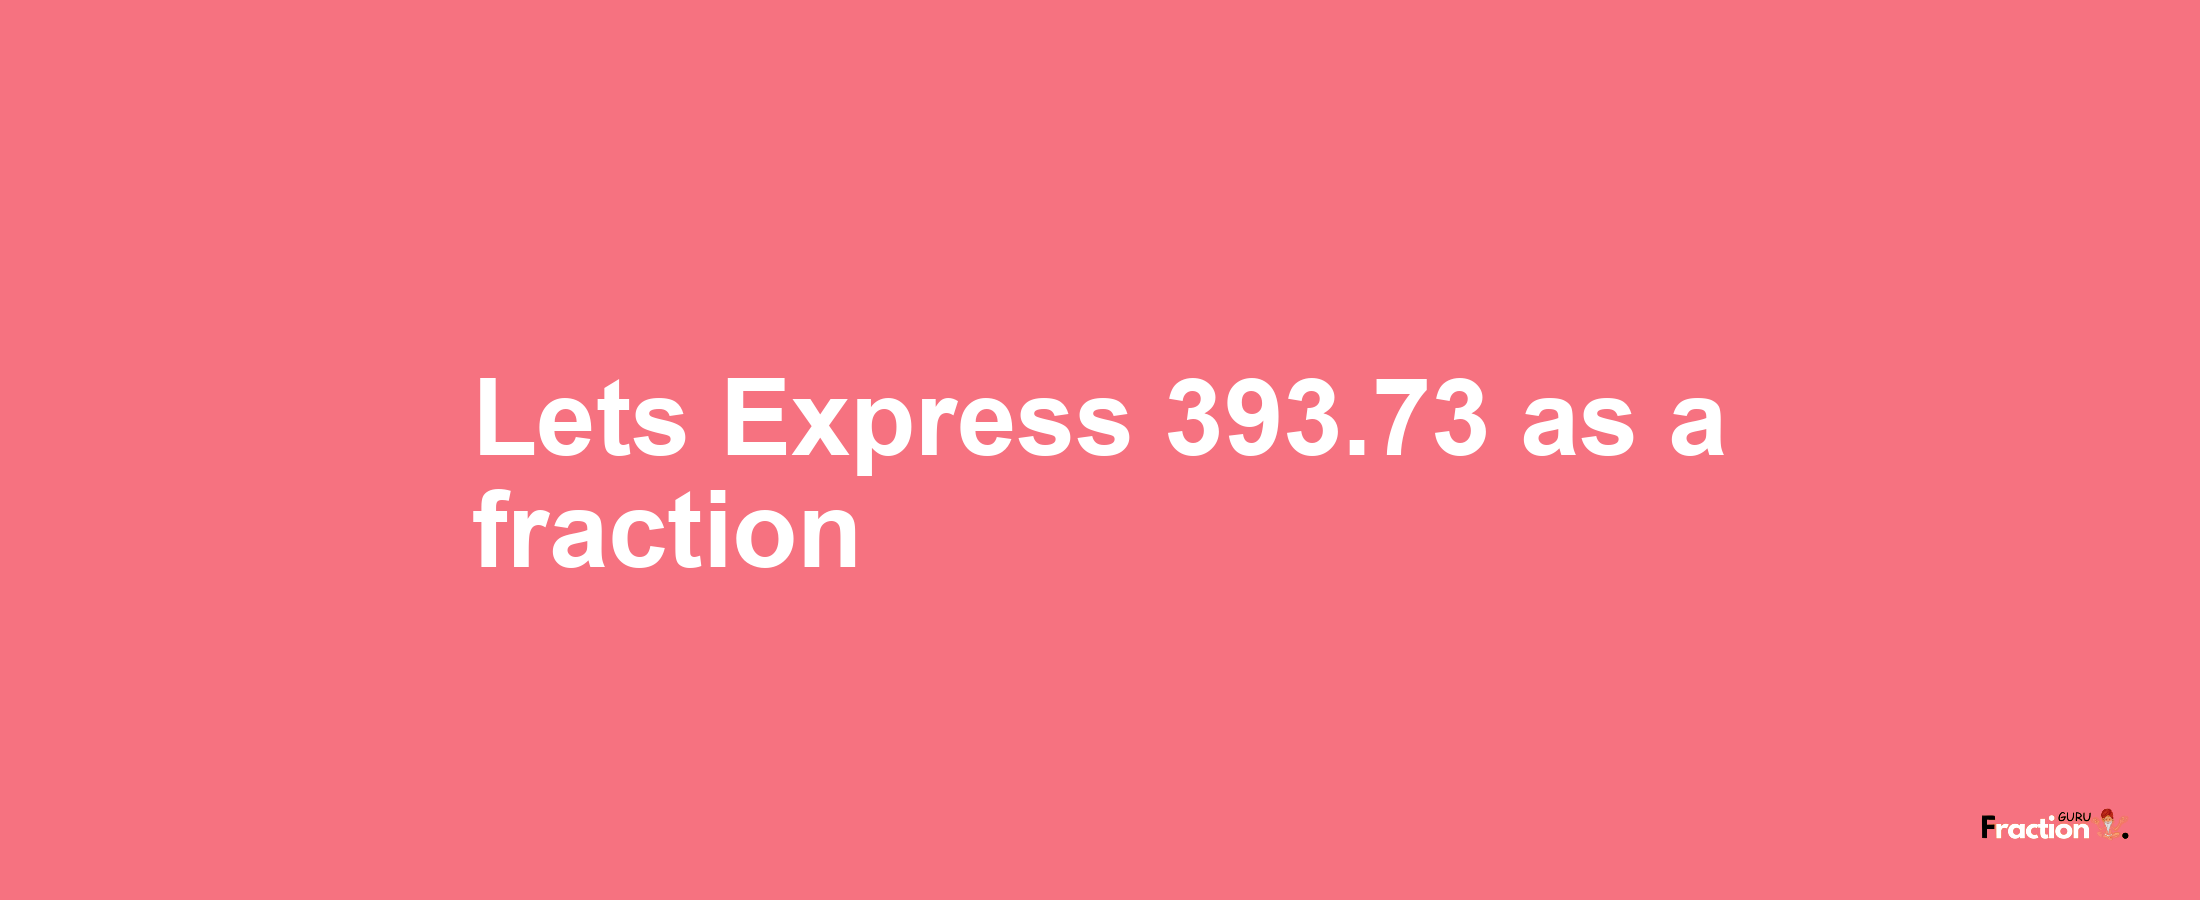 Lets Express 393.73 as afraction